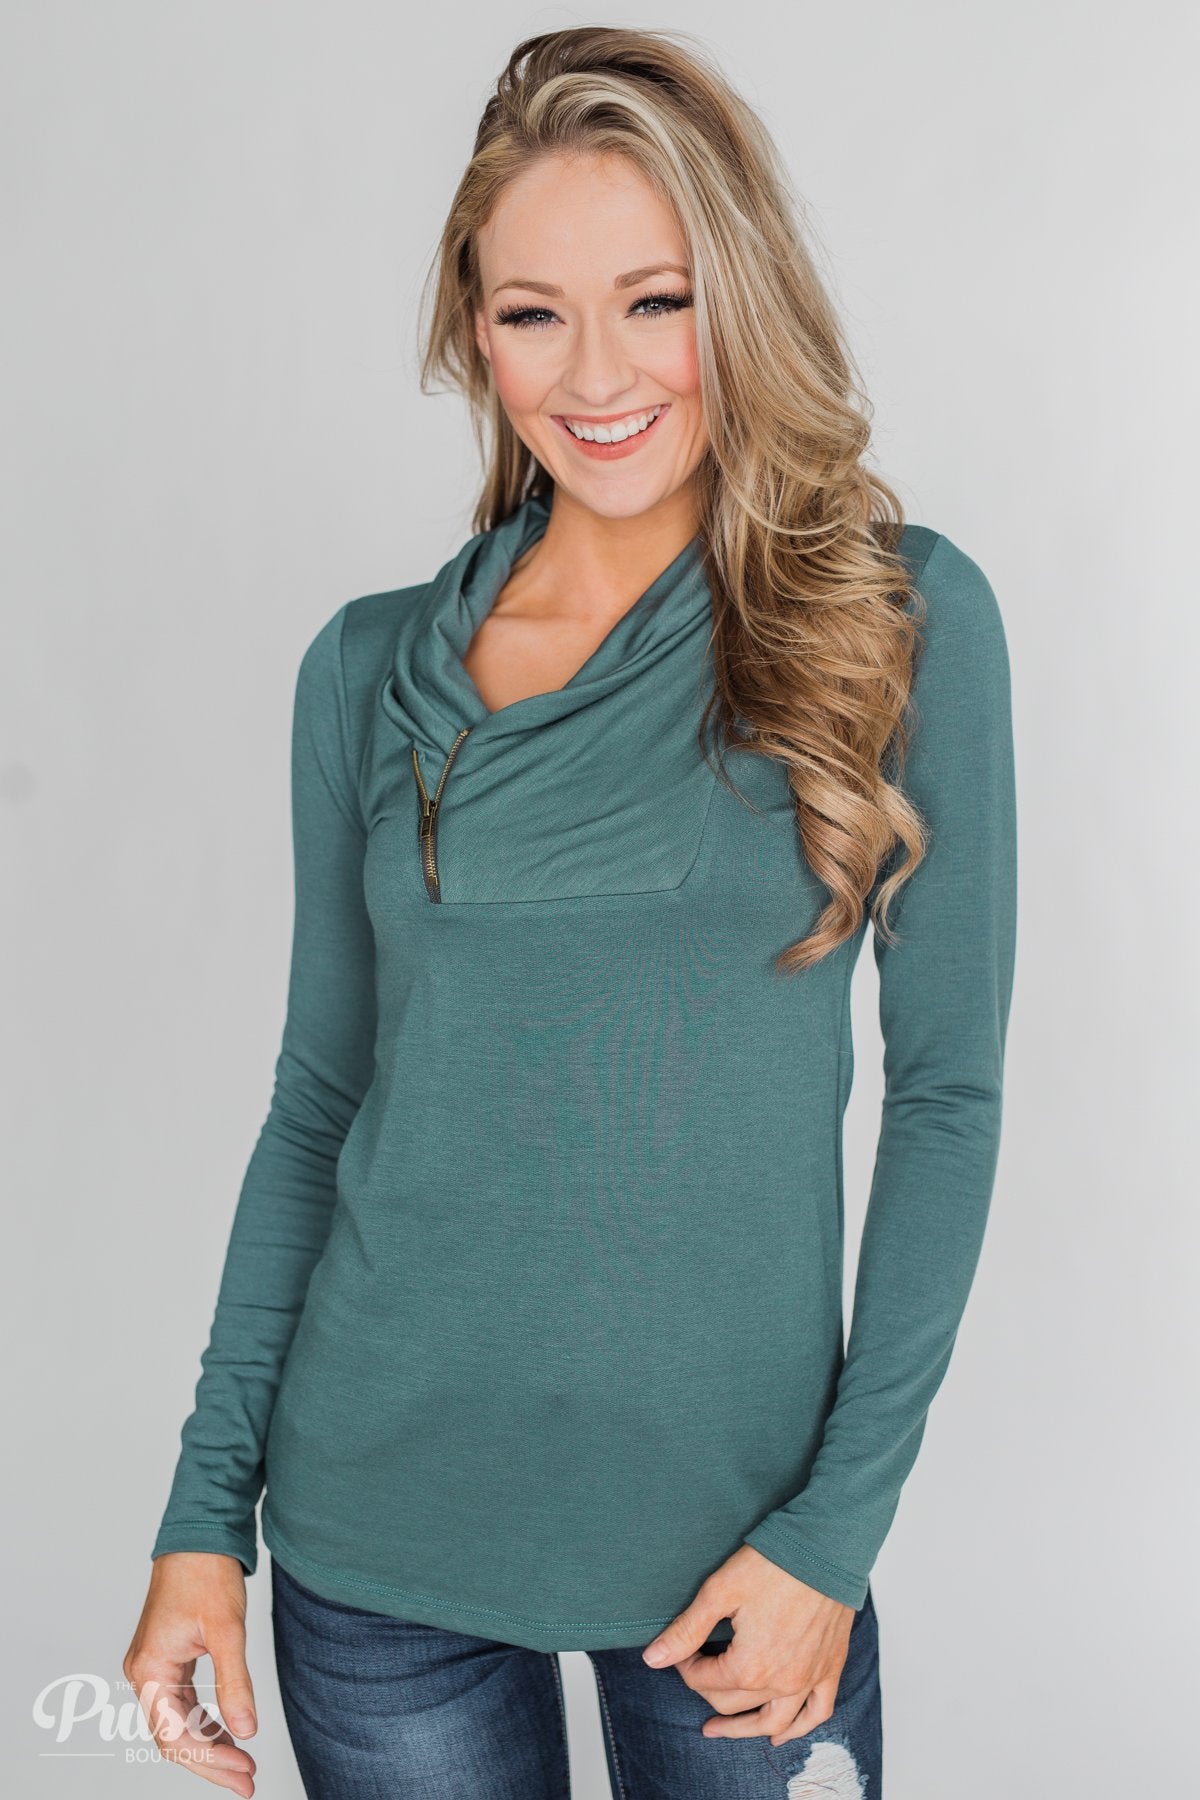 Give Me Time Zipper Pullover Top - Dark Teal